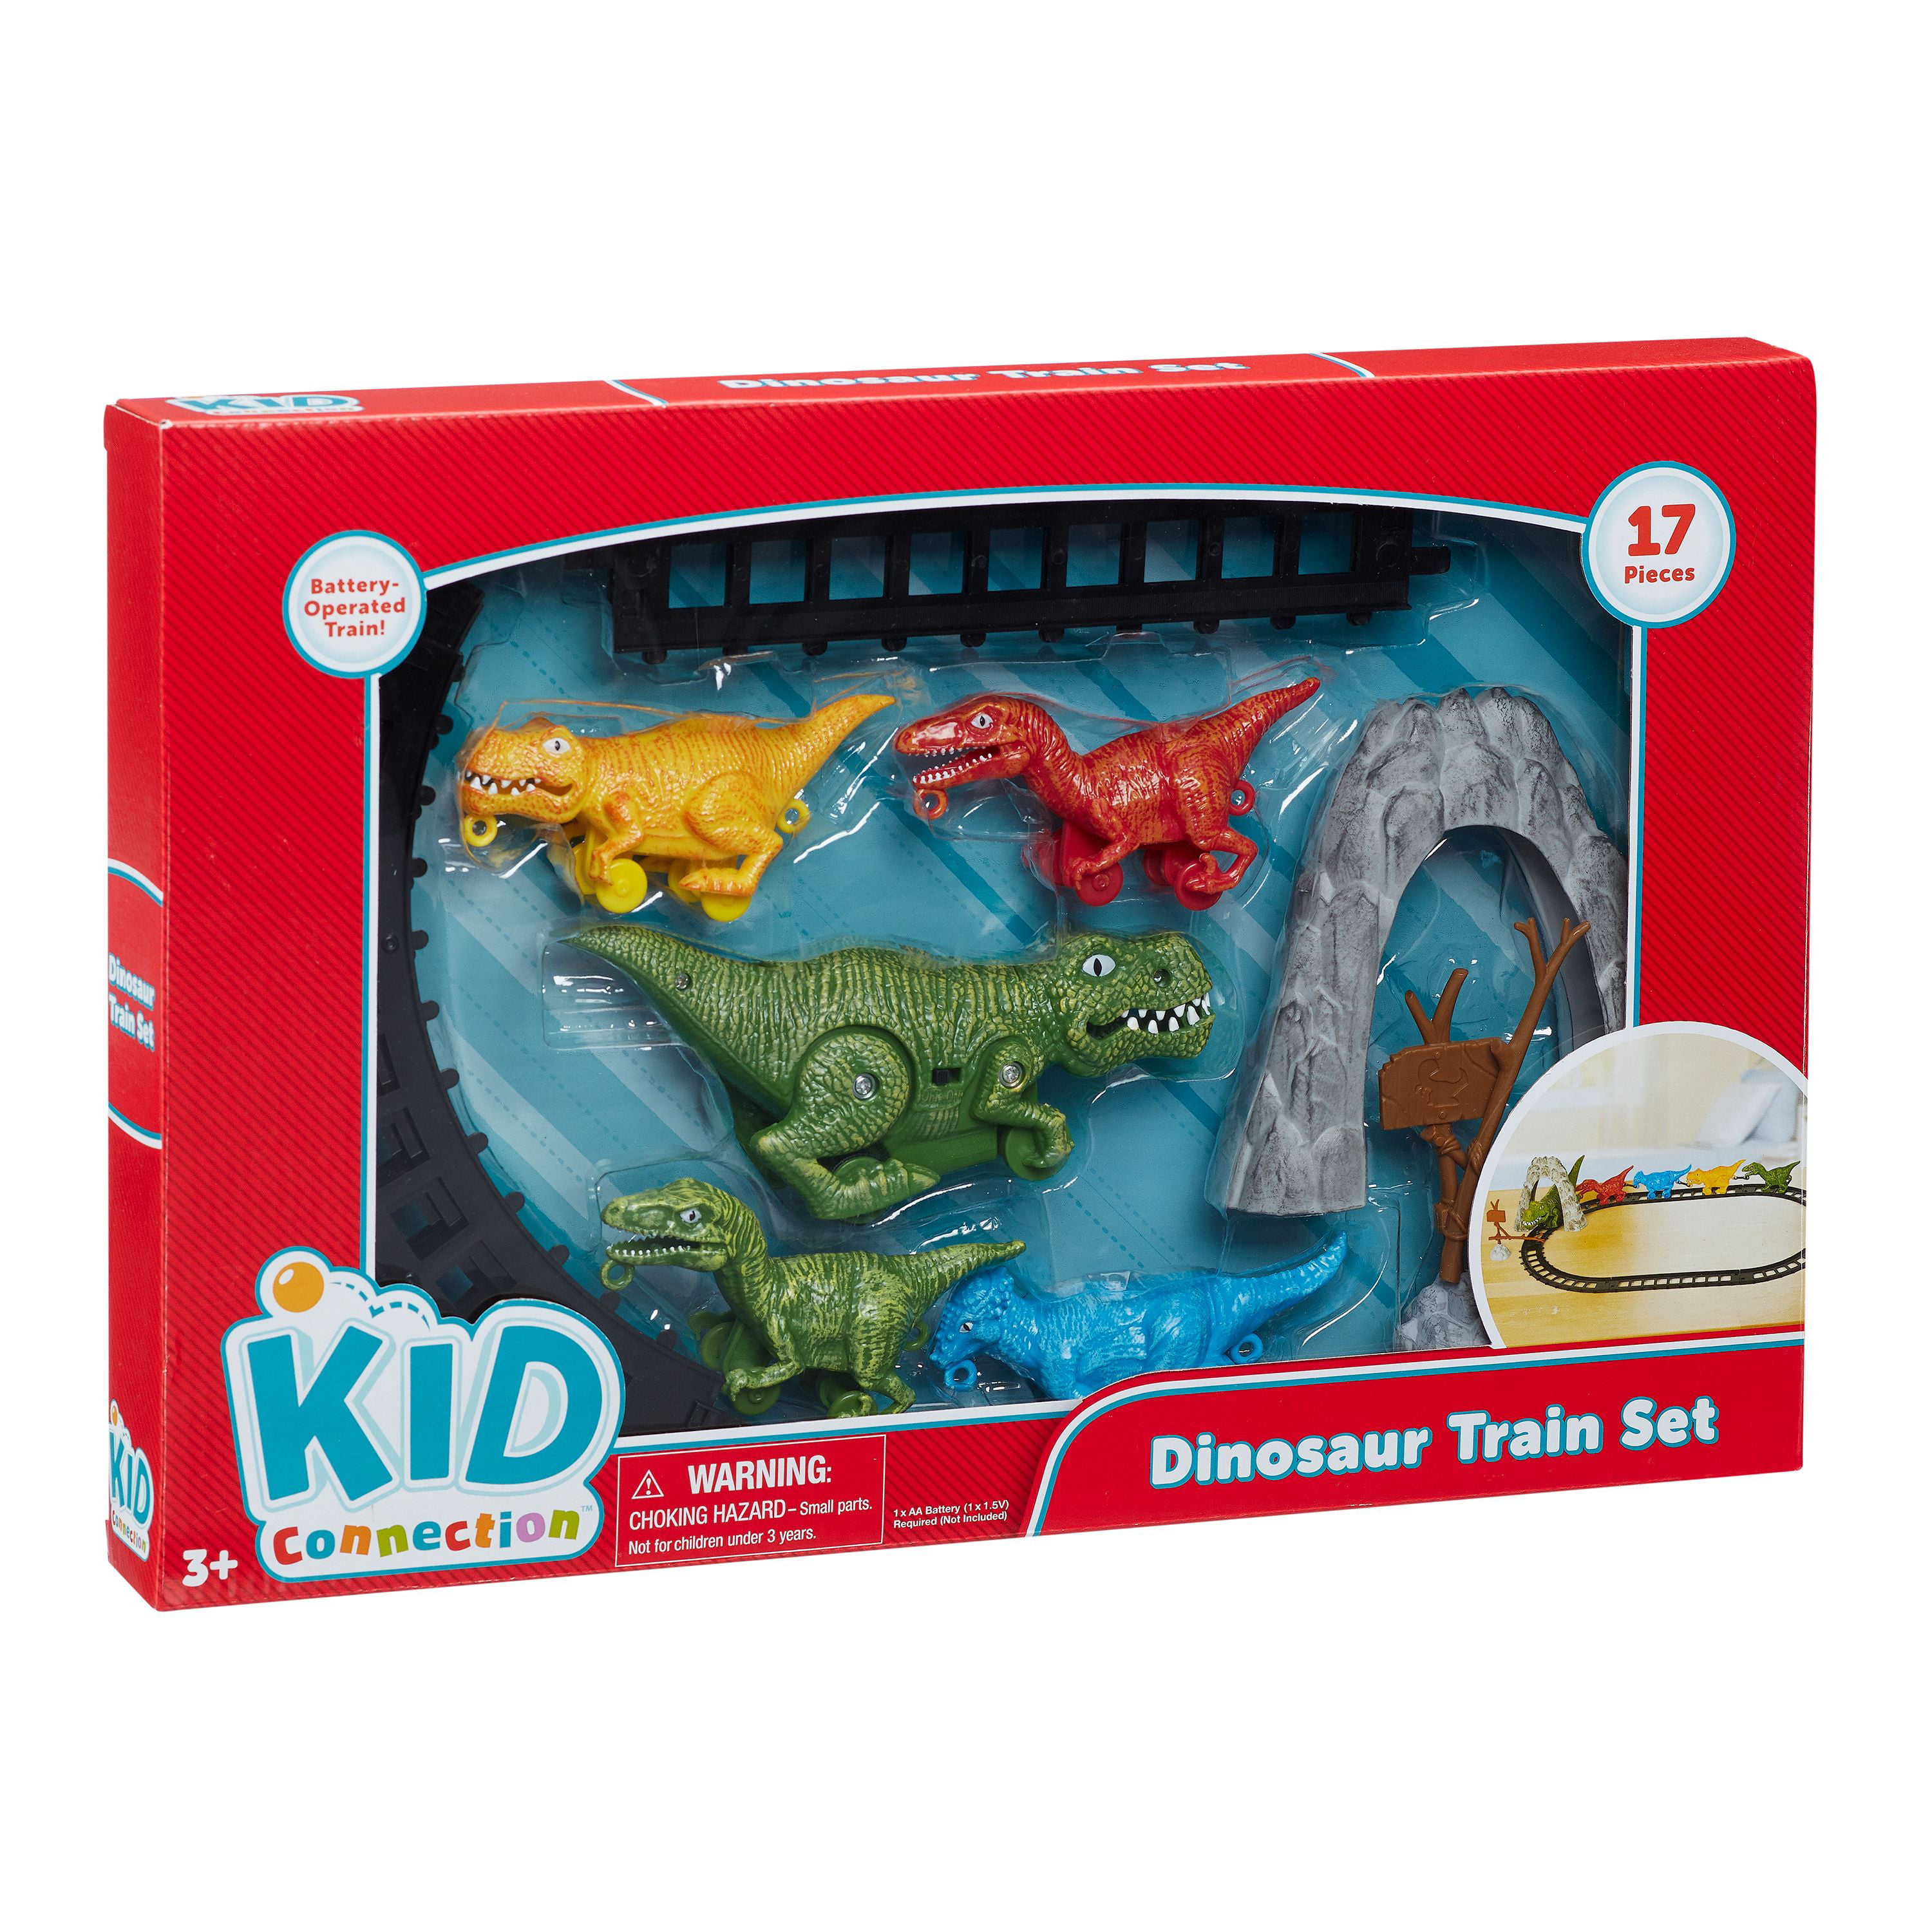 Dinosaur Train Set Ages 3 and up Battery Operated 19 PC Set Kid Connection for sale online 